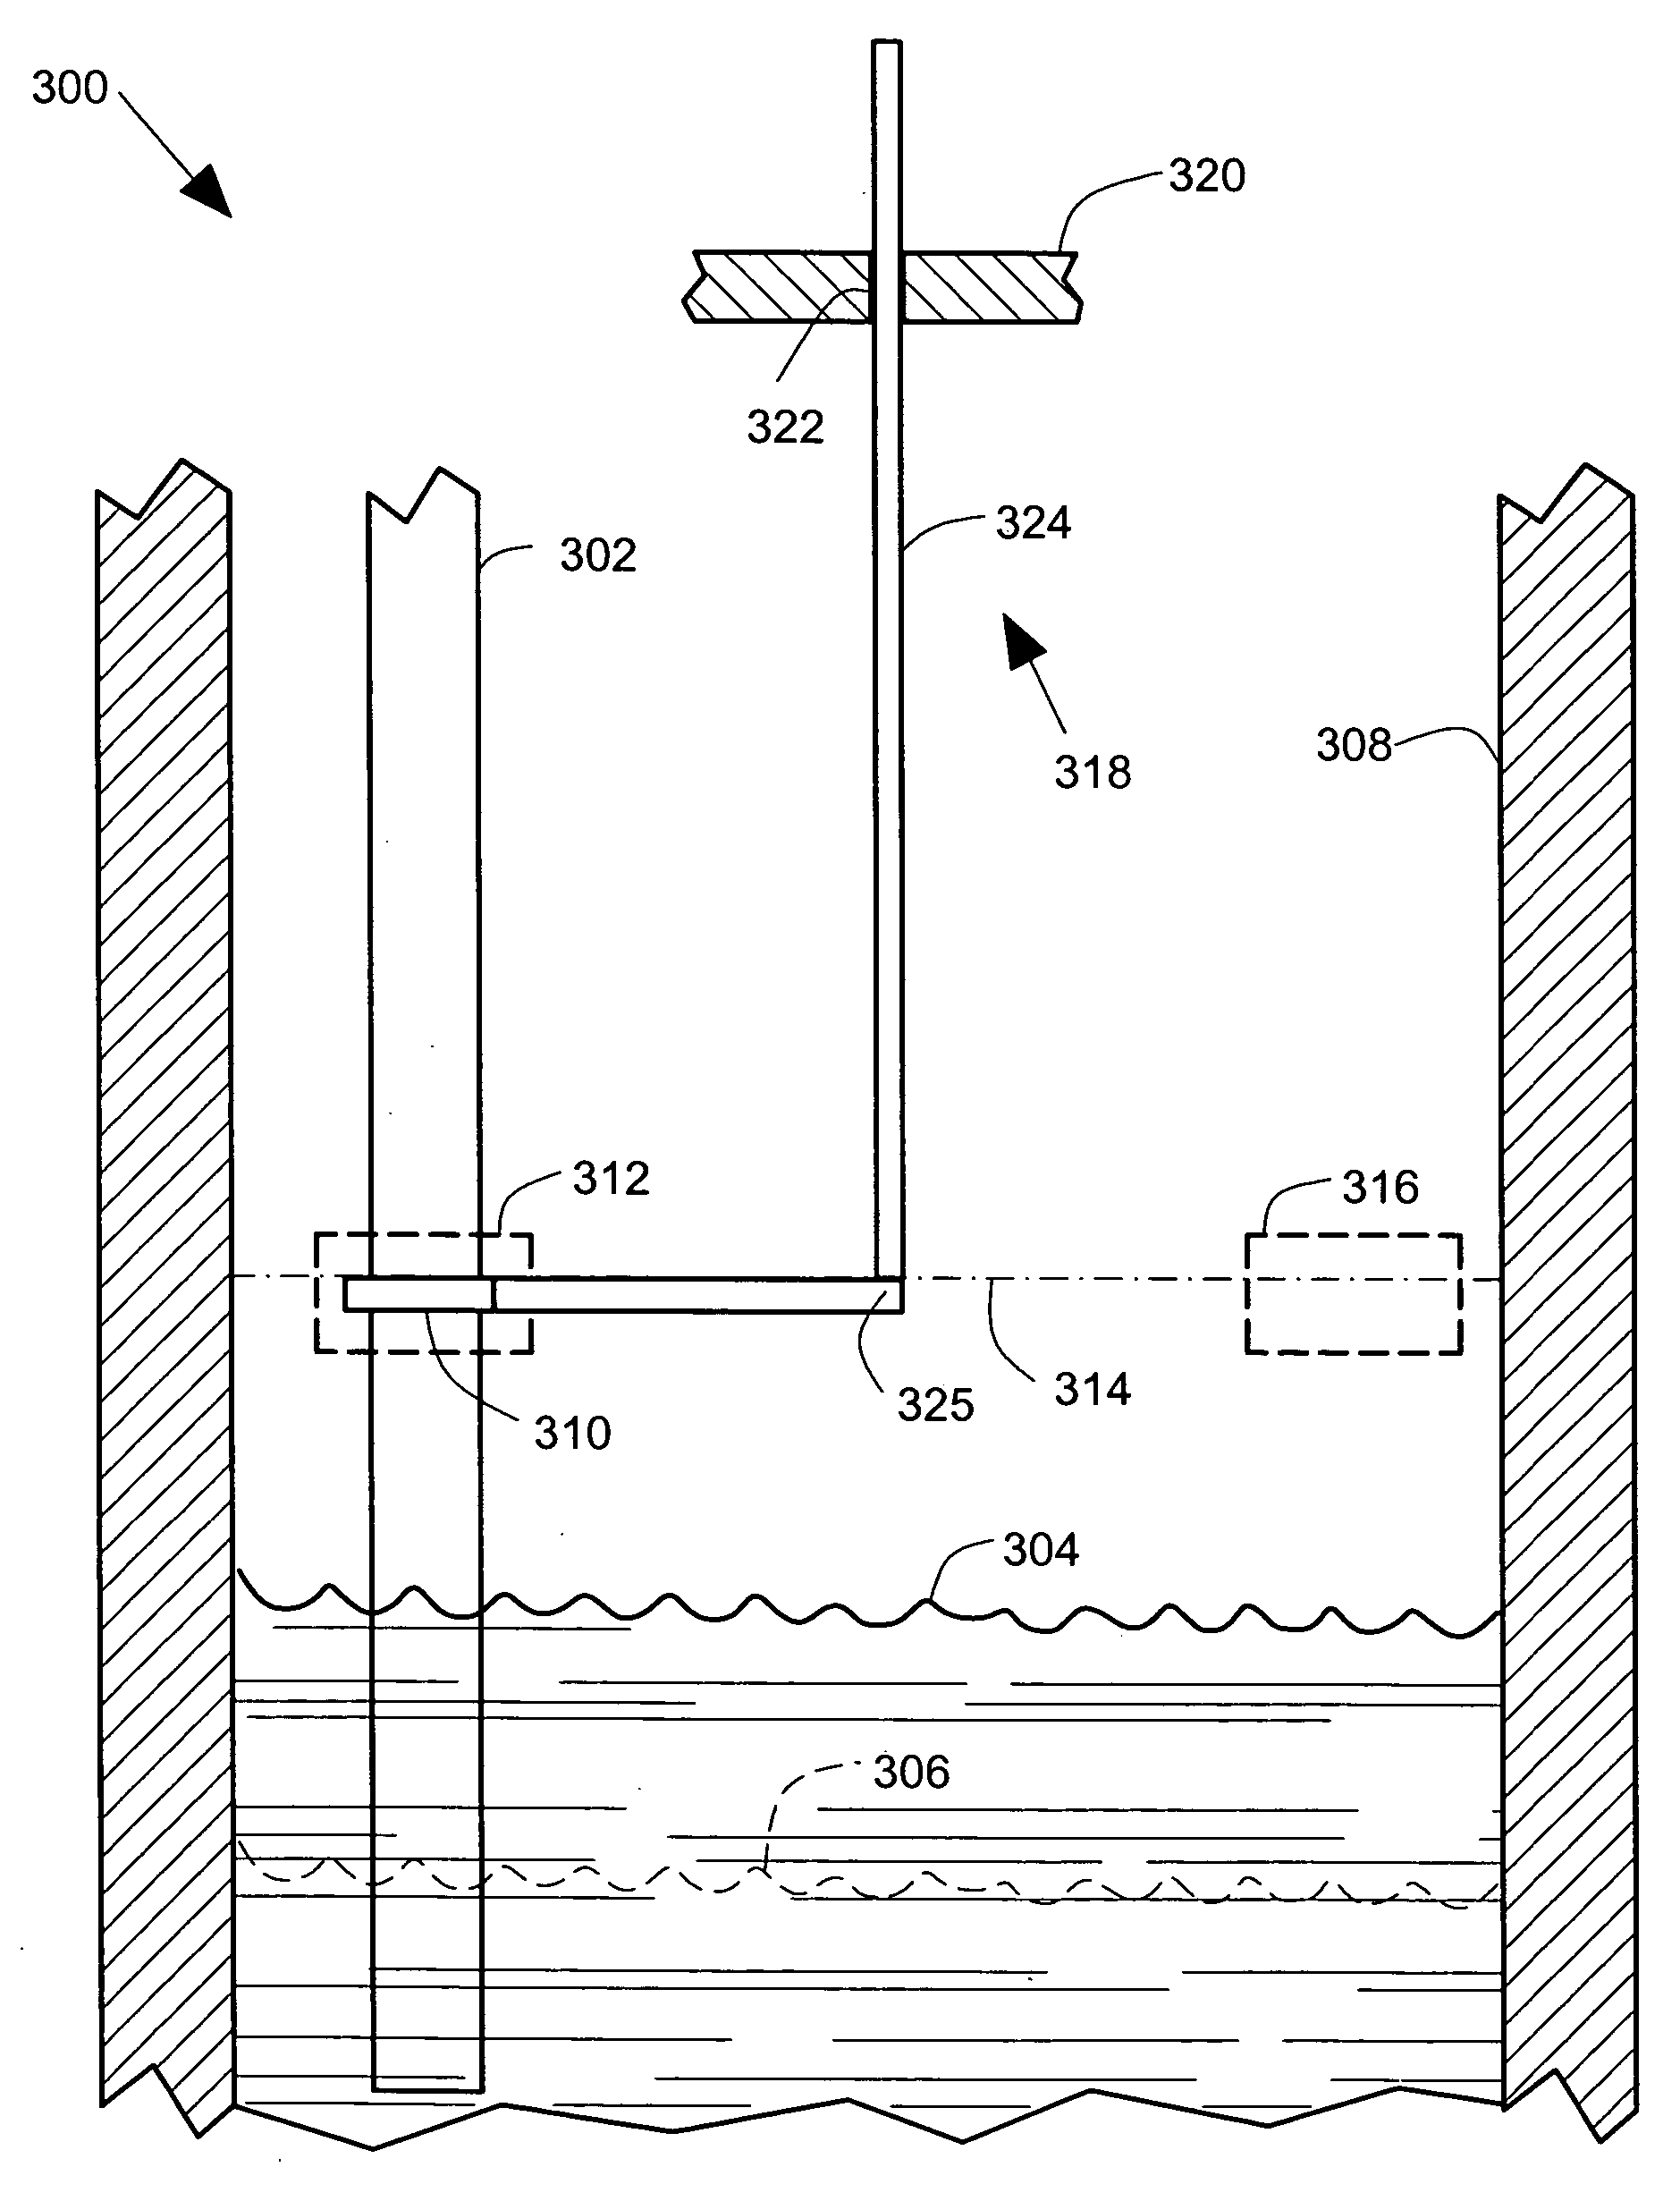 Test apparatus for a waveguide sensing level in a container